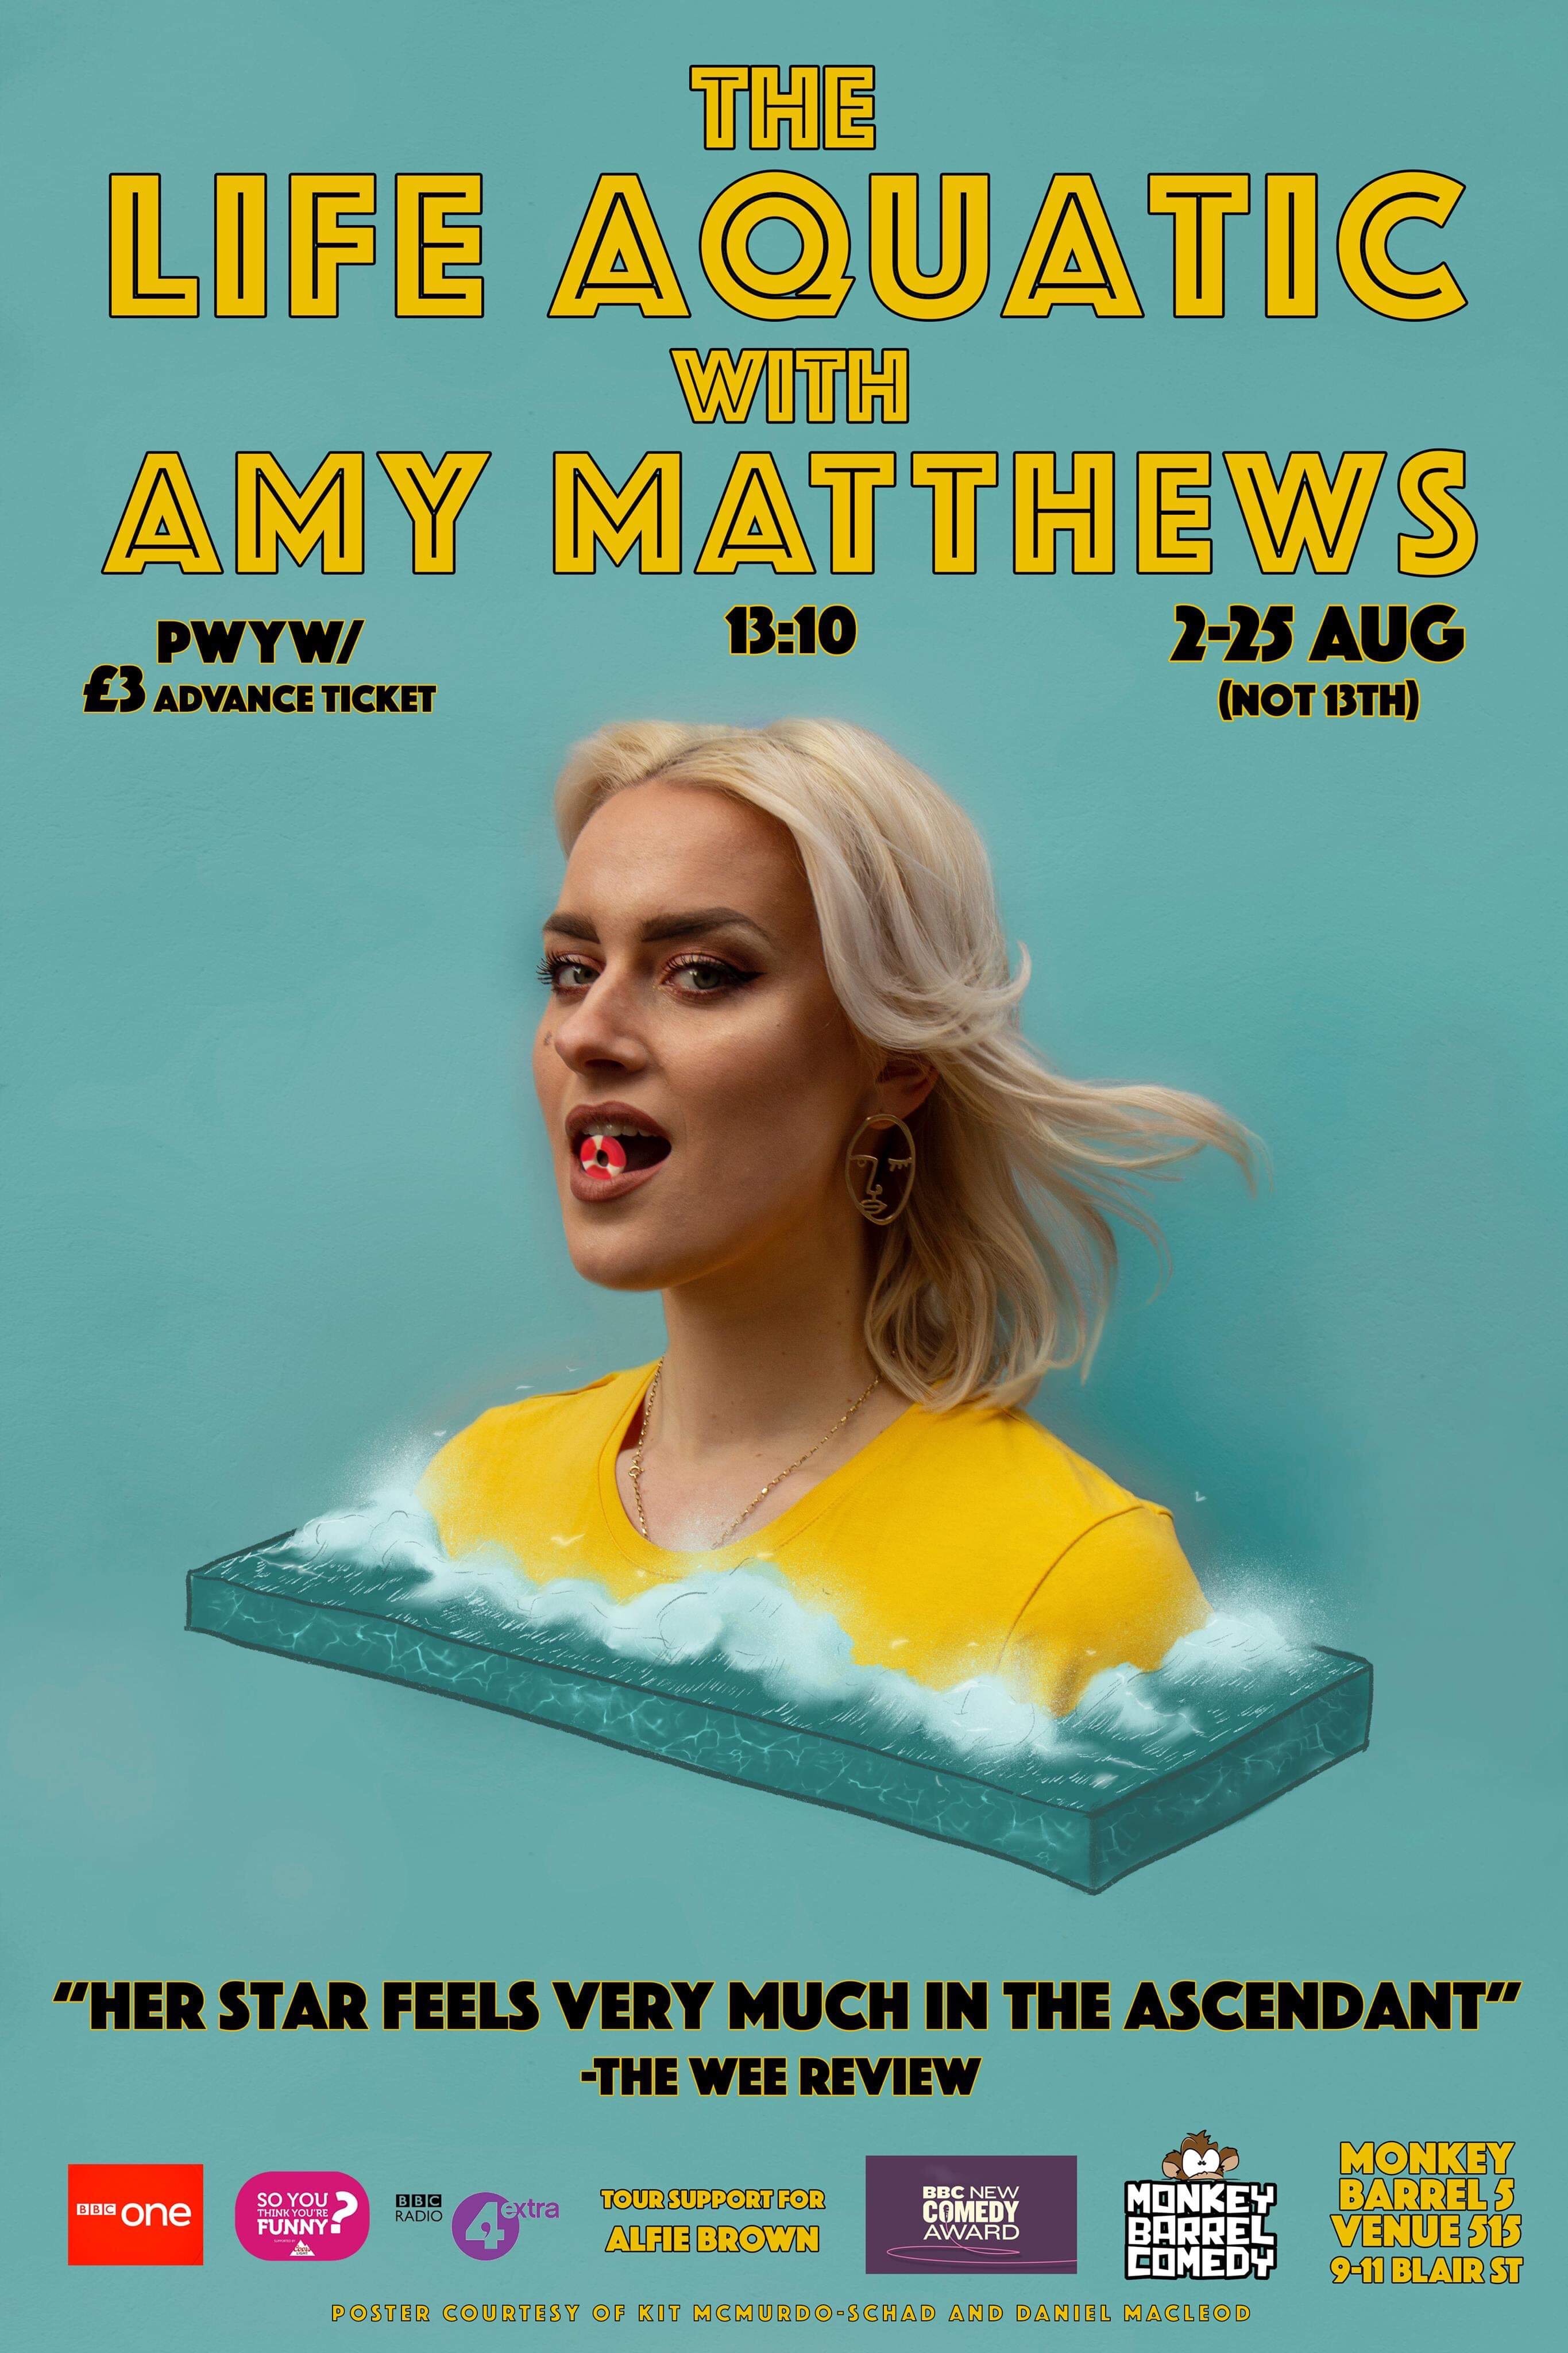 The poster for Amy Matthews: The Life Aquatic with Amy Matthews